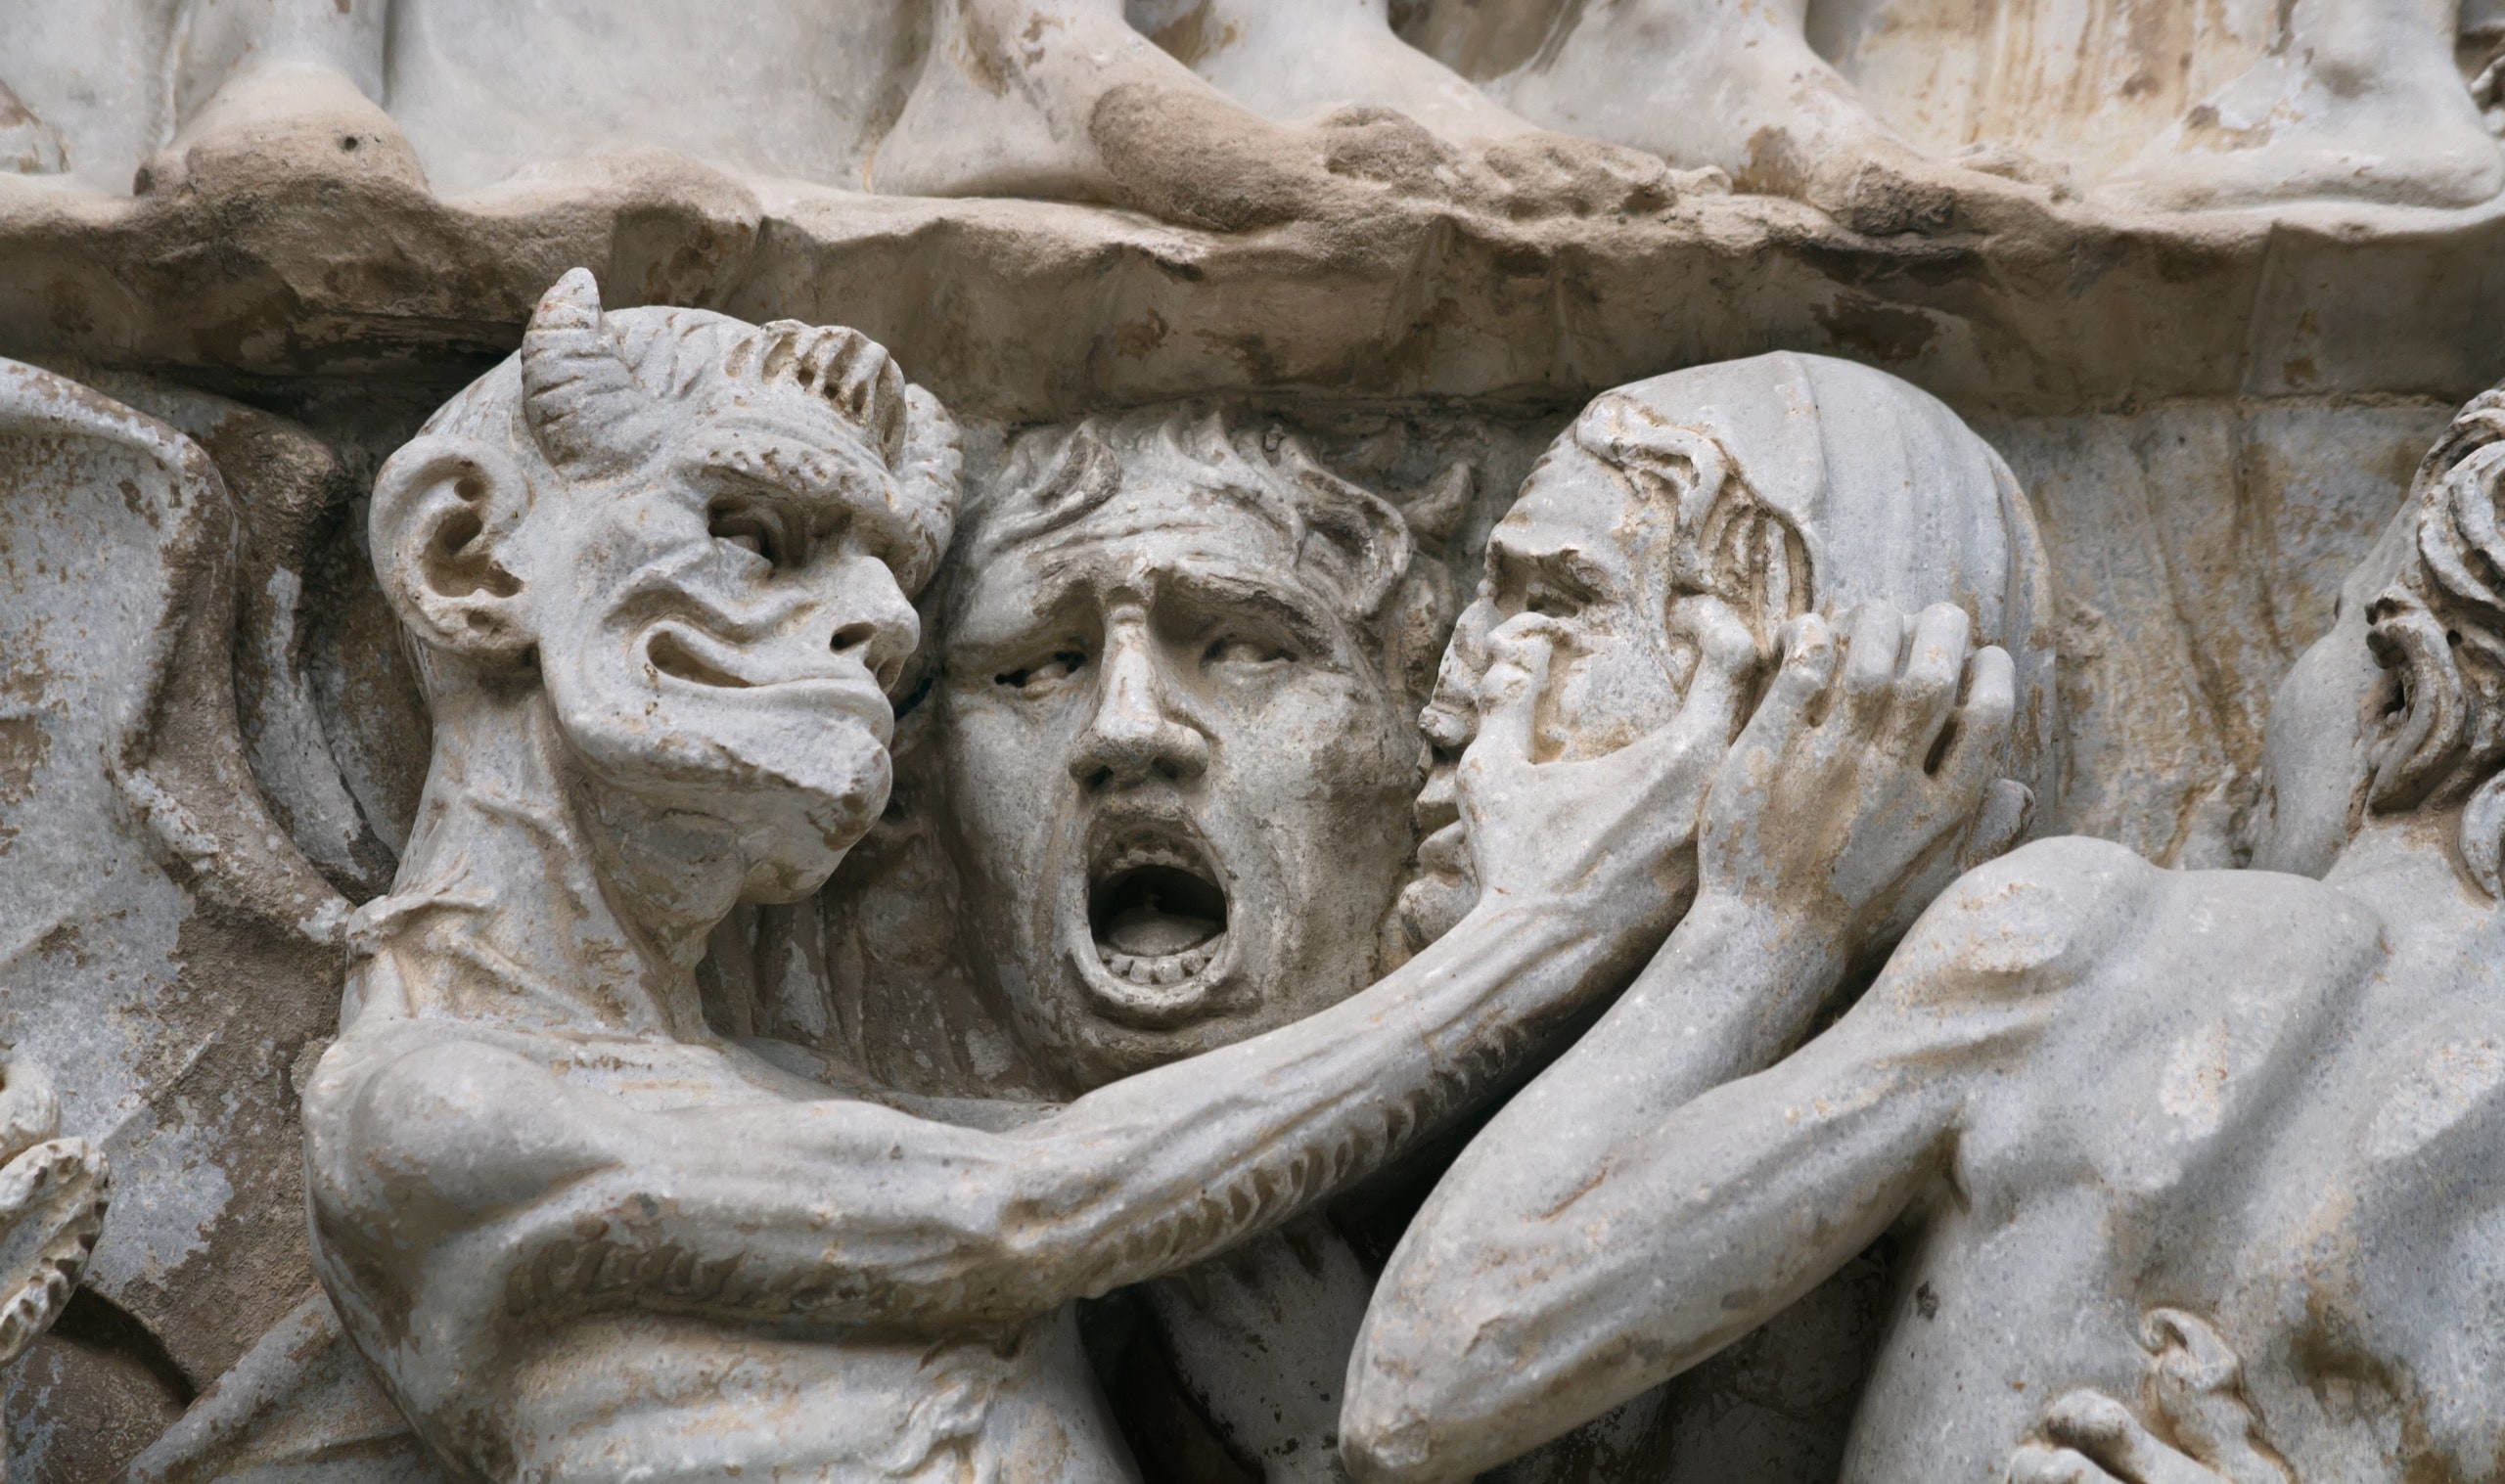 Sculptural group with the image of a devil and sinners on an external facade of the Cathedral, Orvieto, Italy